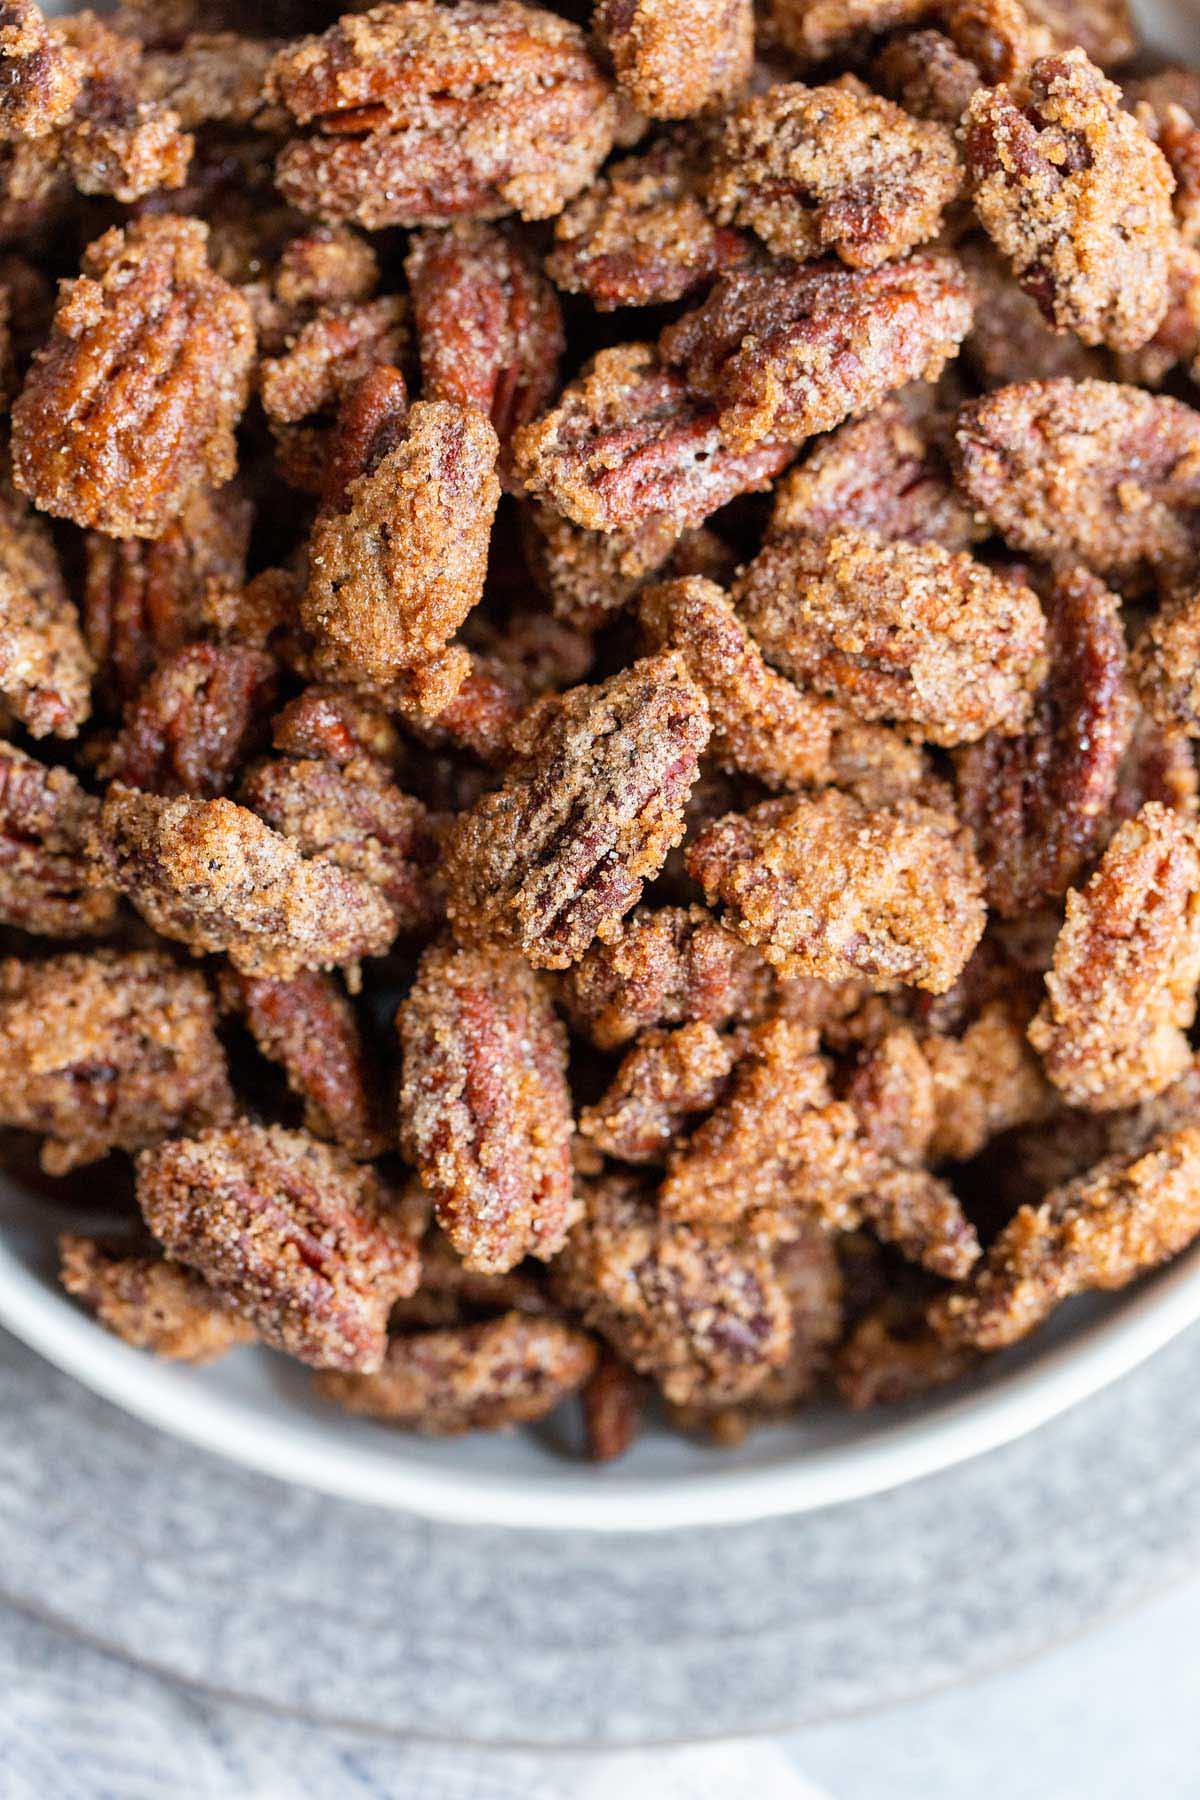 Candied pecans up close.